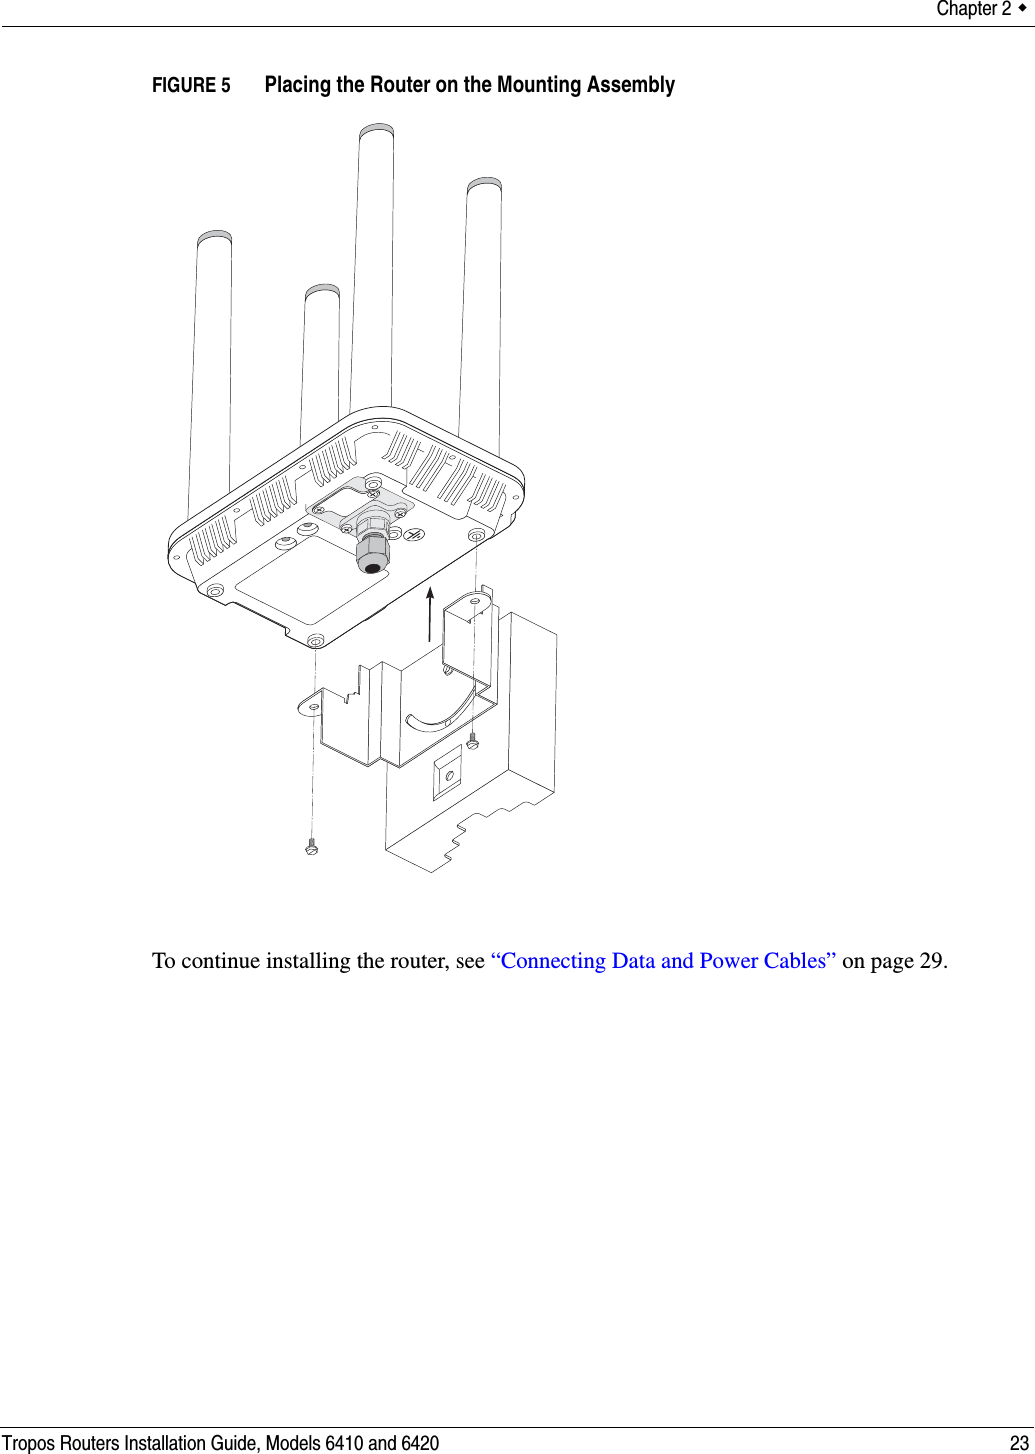 Chapter 2  Tropos Routers Installation Guide, Models 6410 and 6420 23FIGURE 5   Placing the Router on the Mounting AssemblyTo continue installing the router, see “Connecting Data and Power Cables” on page 29.